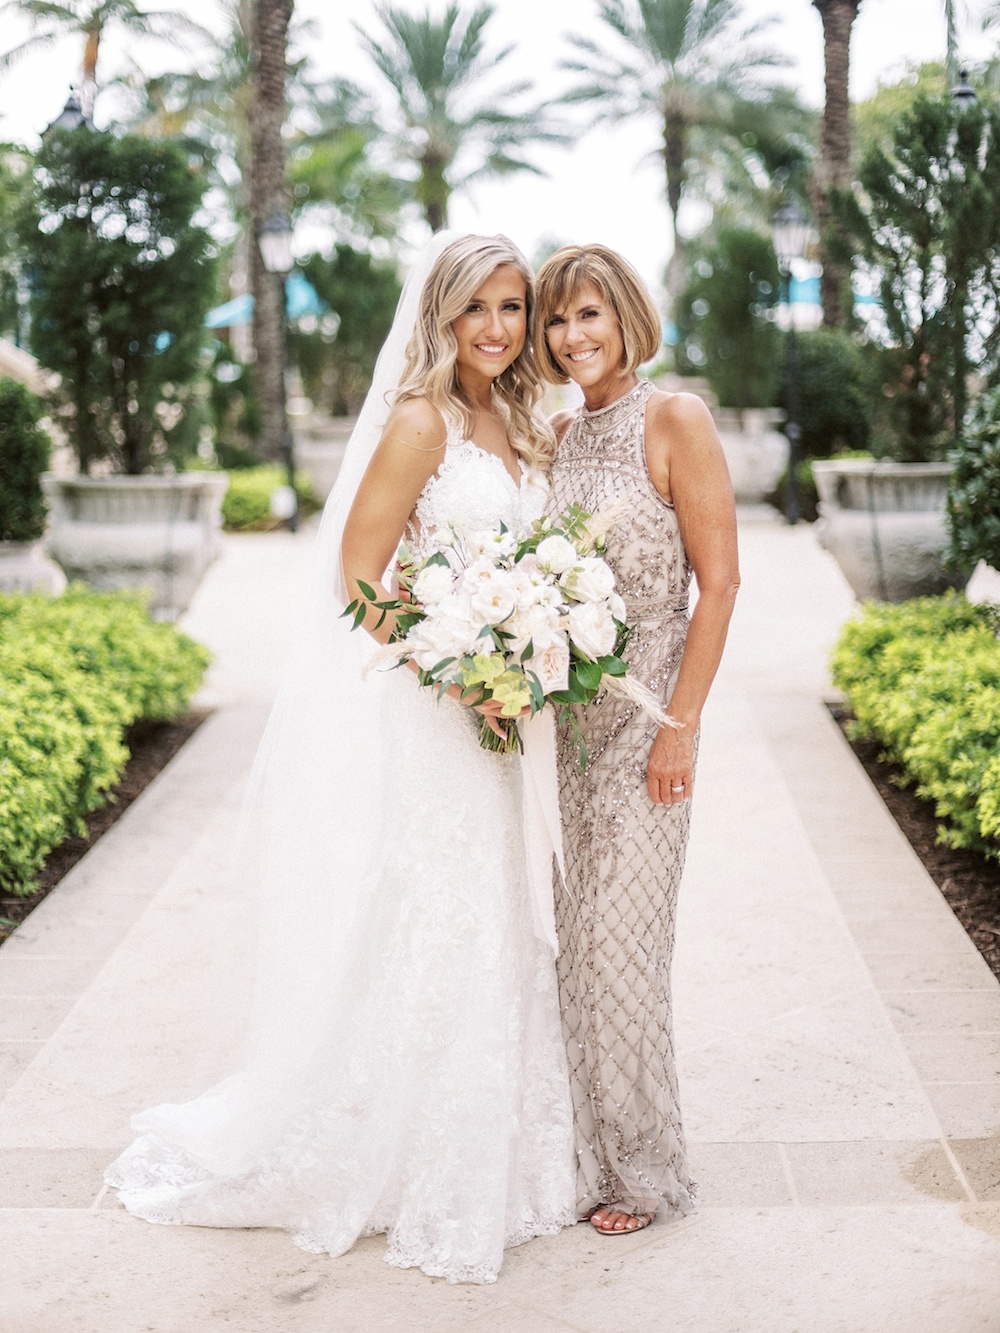 mother and daughter standing together on brides wedding day